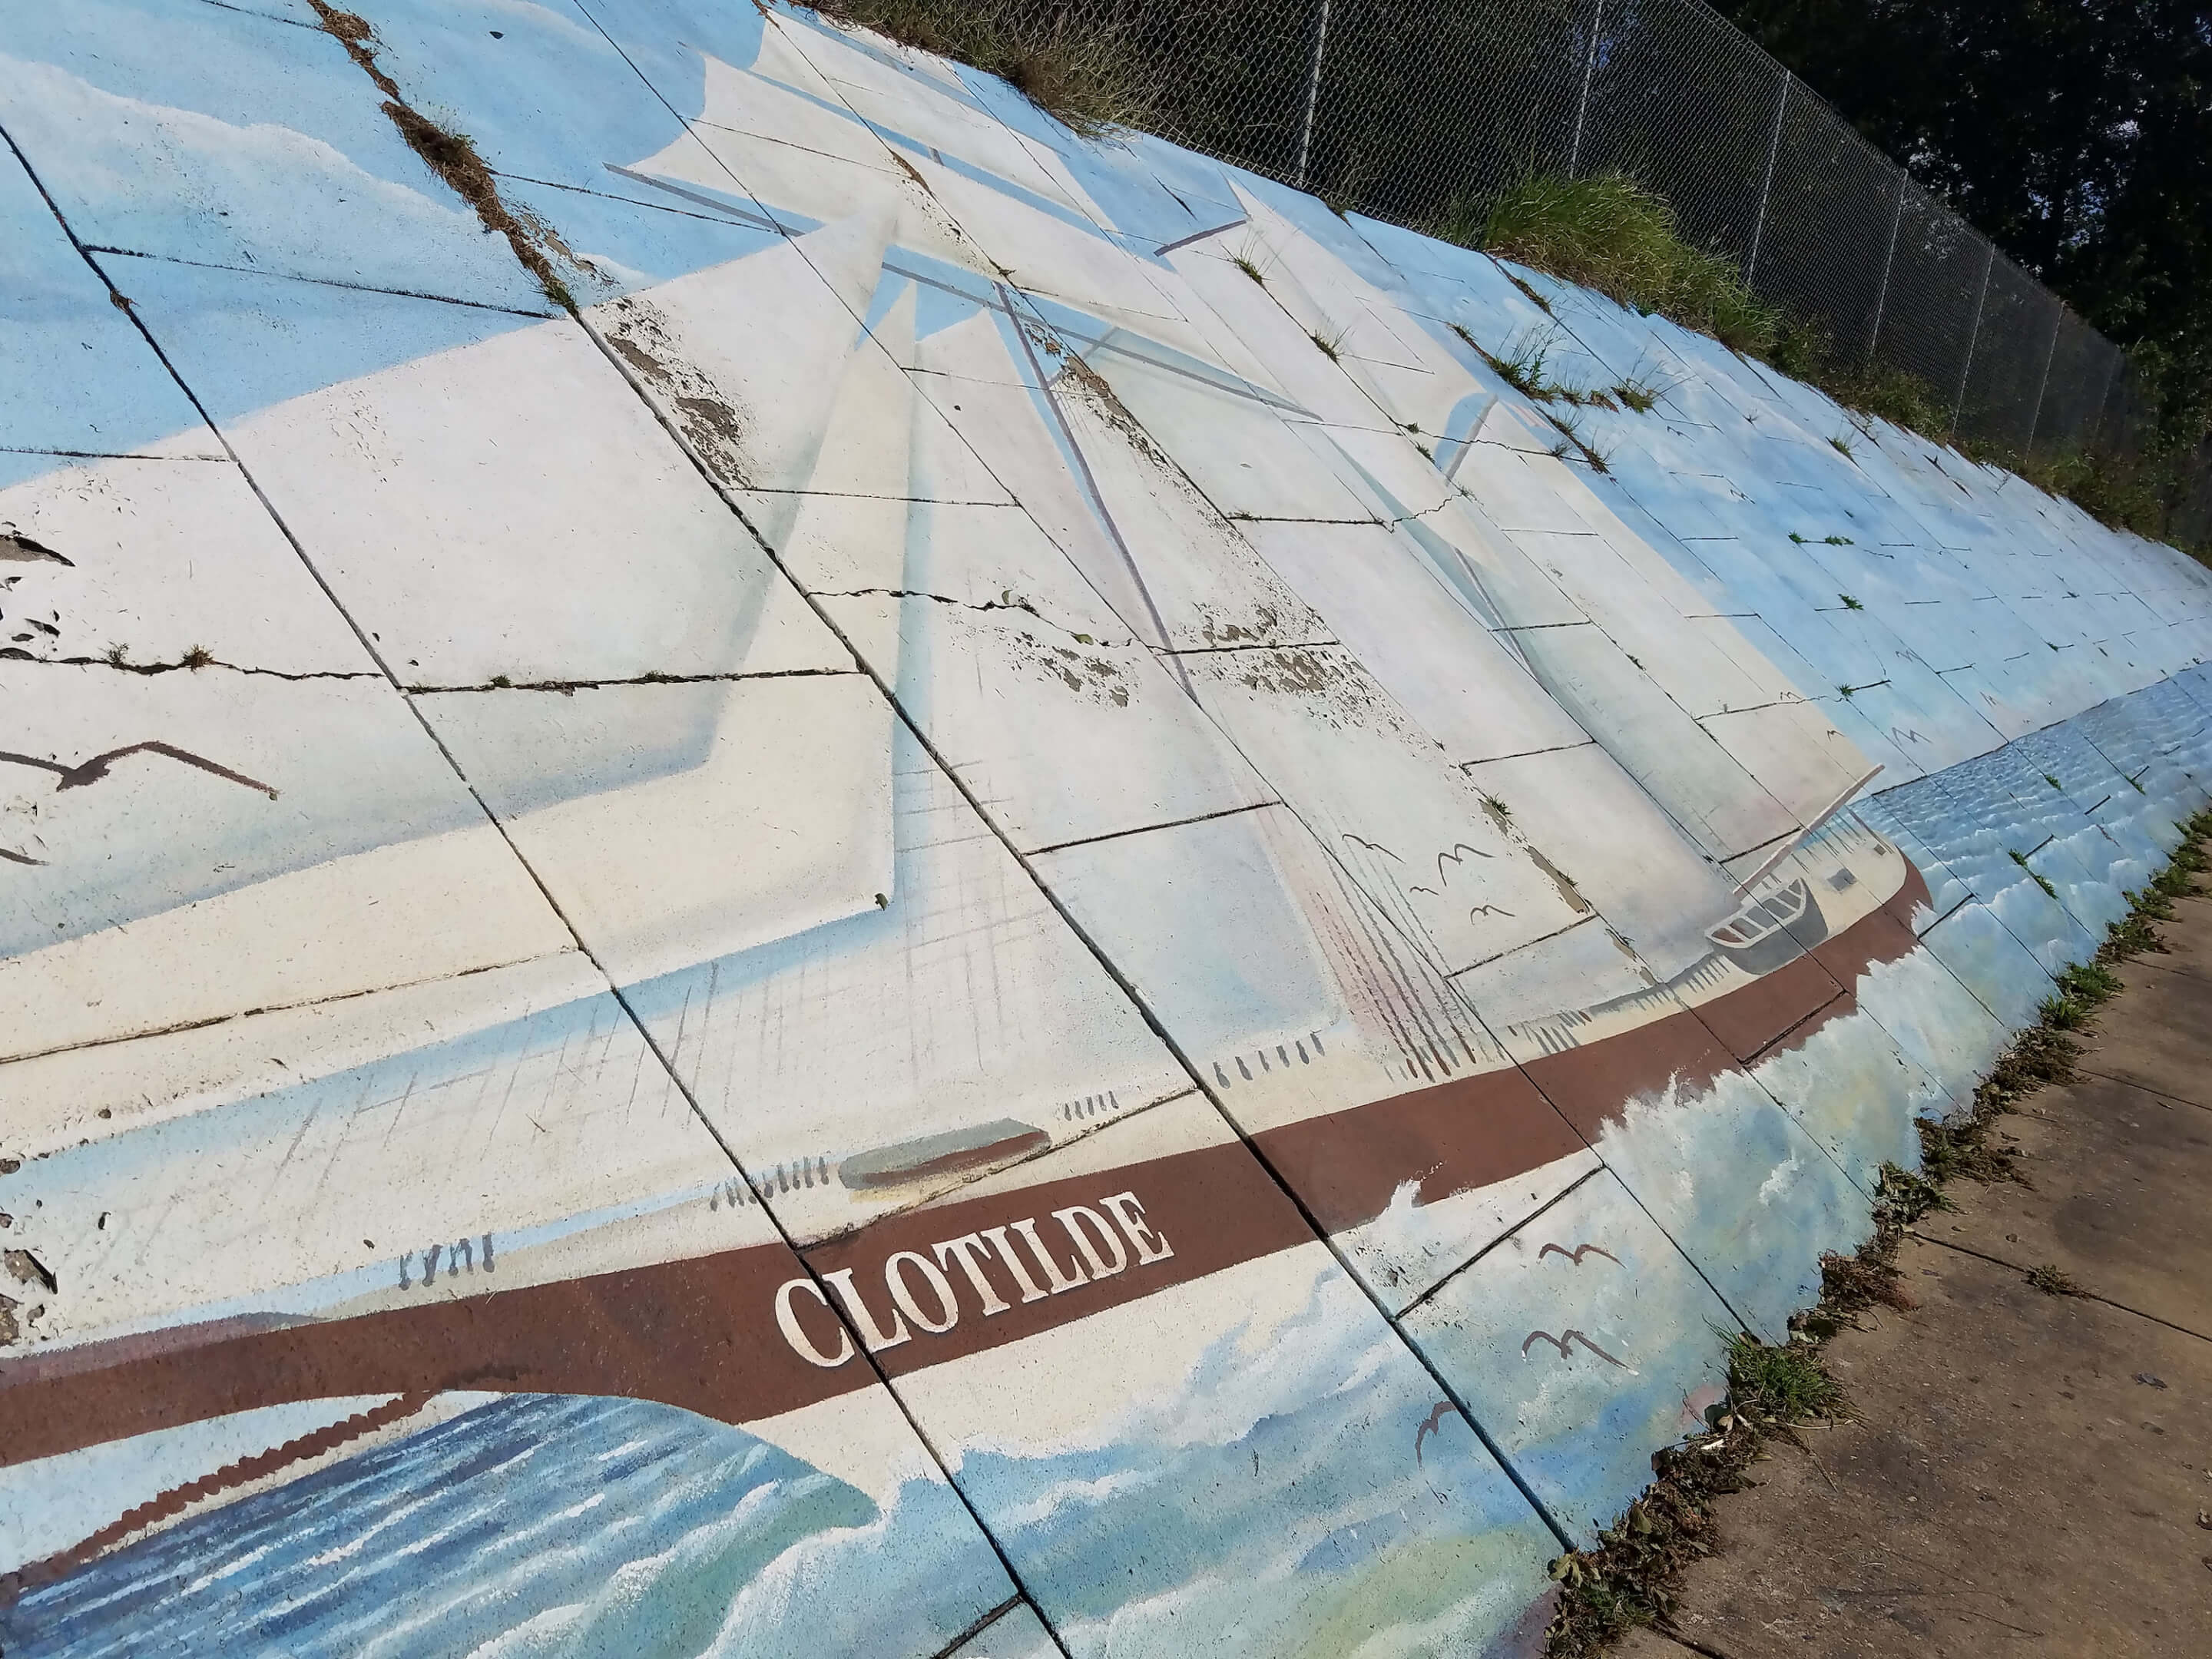 mural of a boat